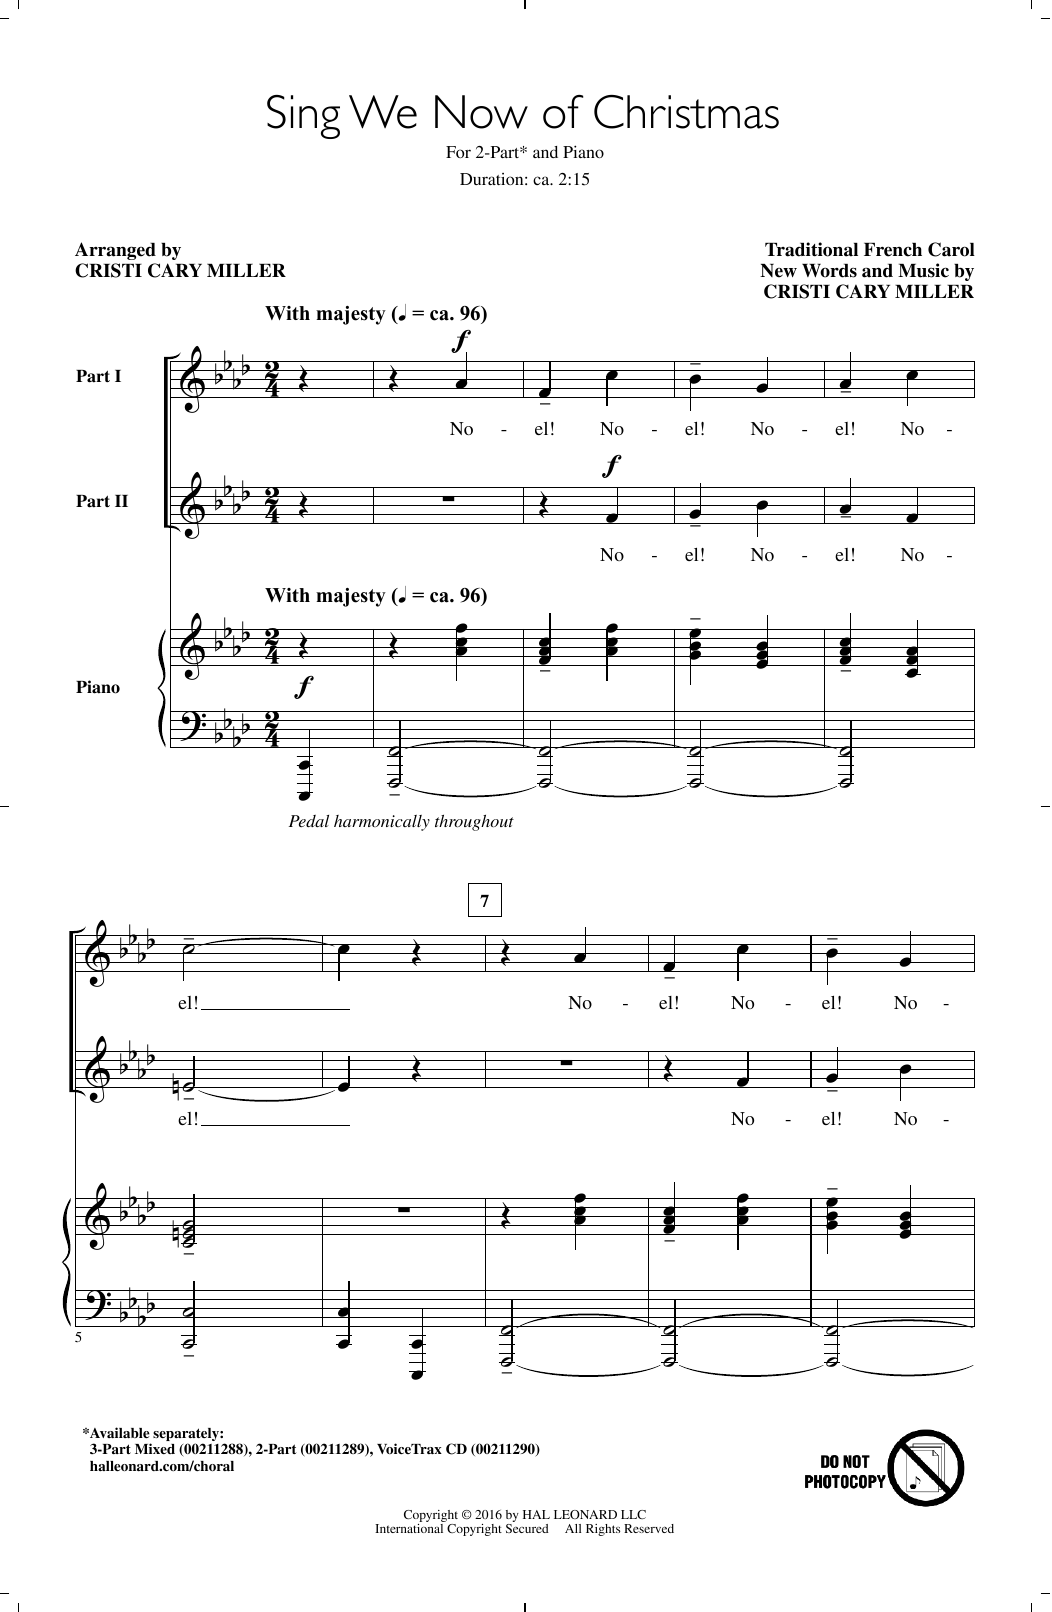 Download Cristi Cary Miller Sing We Now Of Christmas Sheet Music